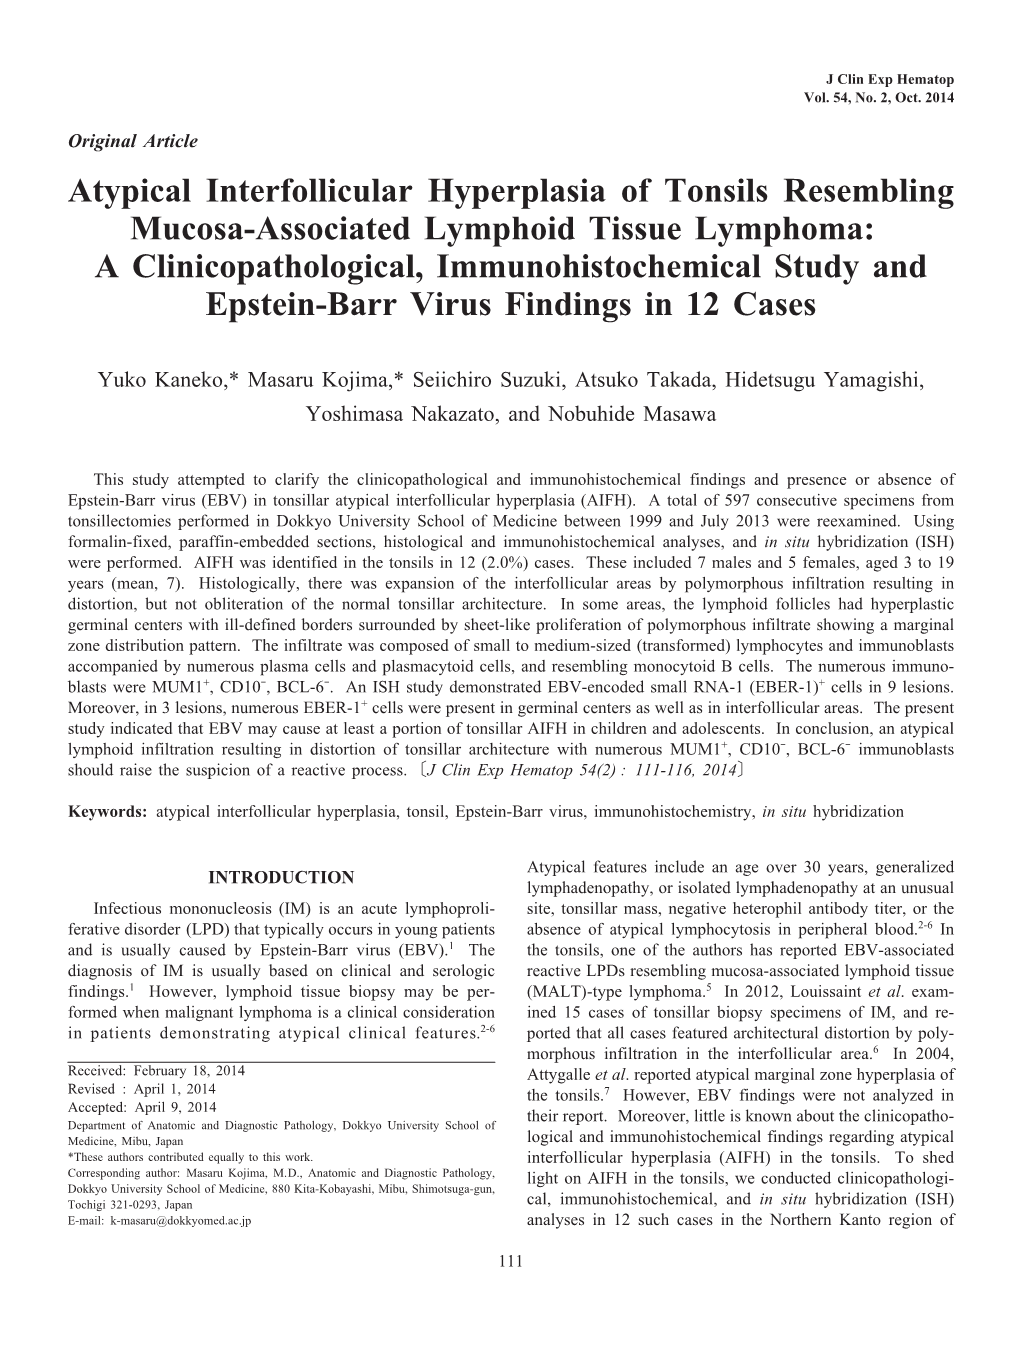 Atypical Interfollicular Hyperplasia of Tonsils Resembling